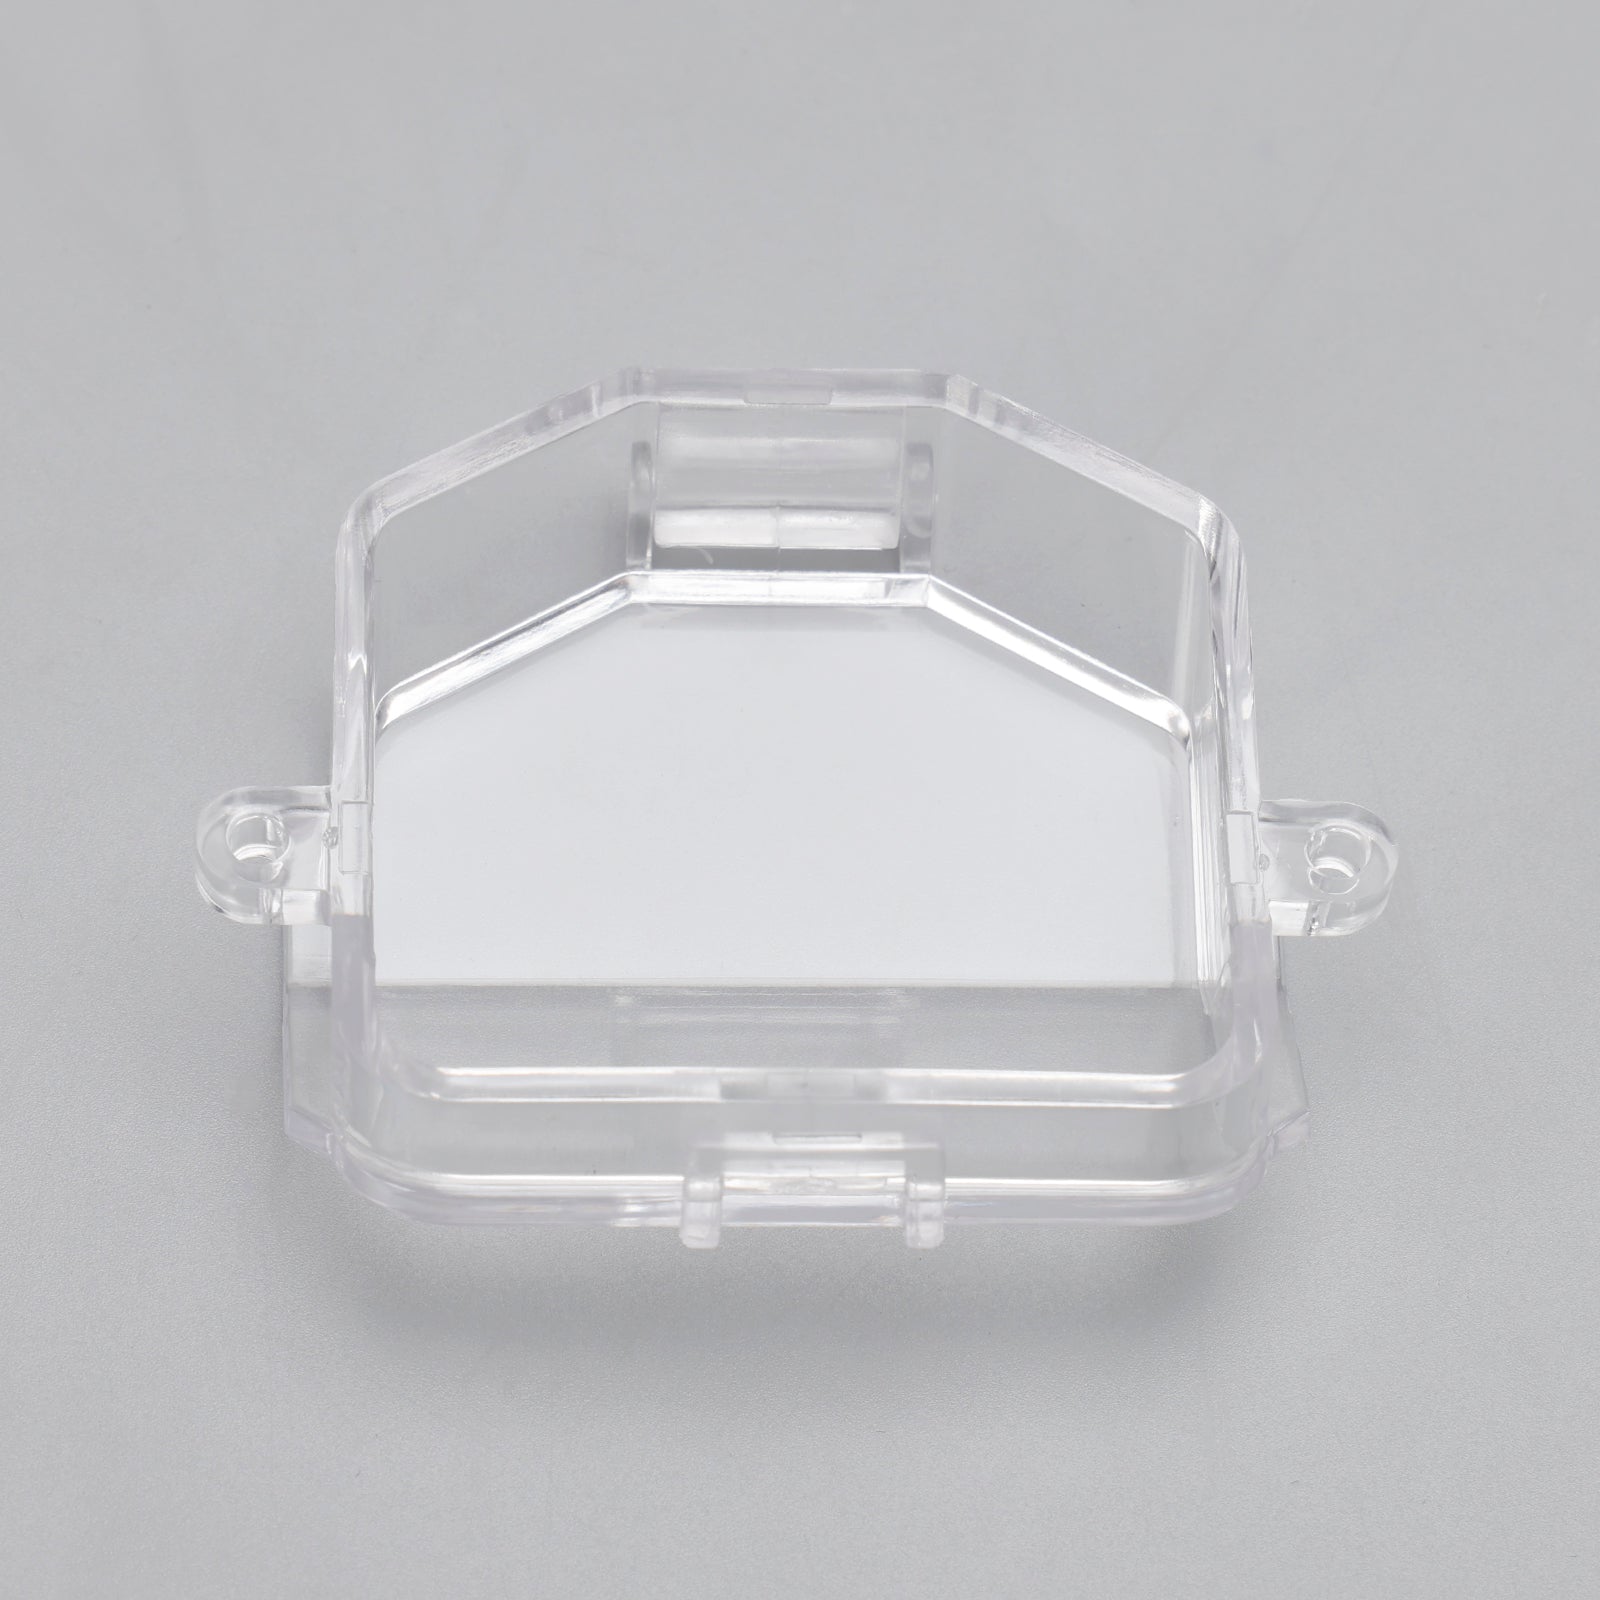 Waterproof Switch Cover Guard Cap Lip Protector Clear For Honda Adv160 22-23